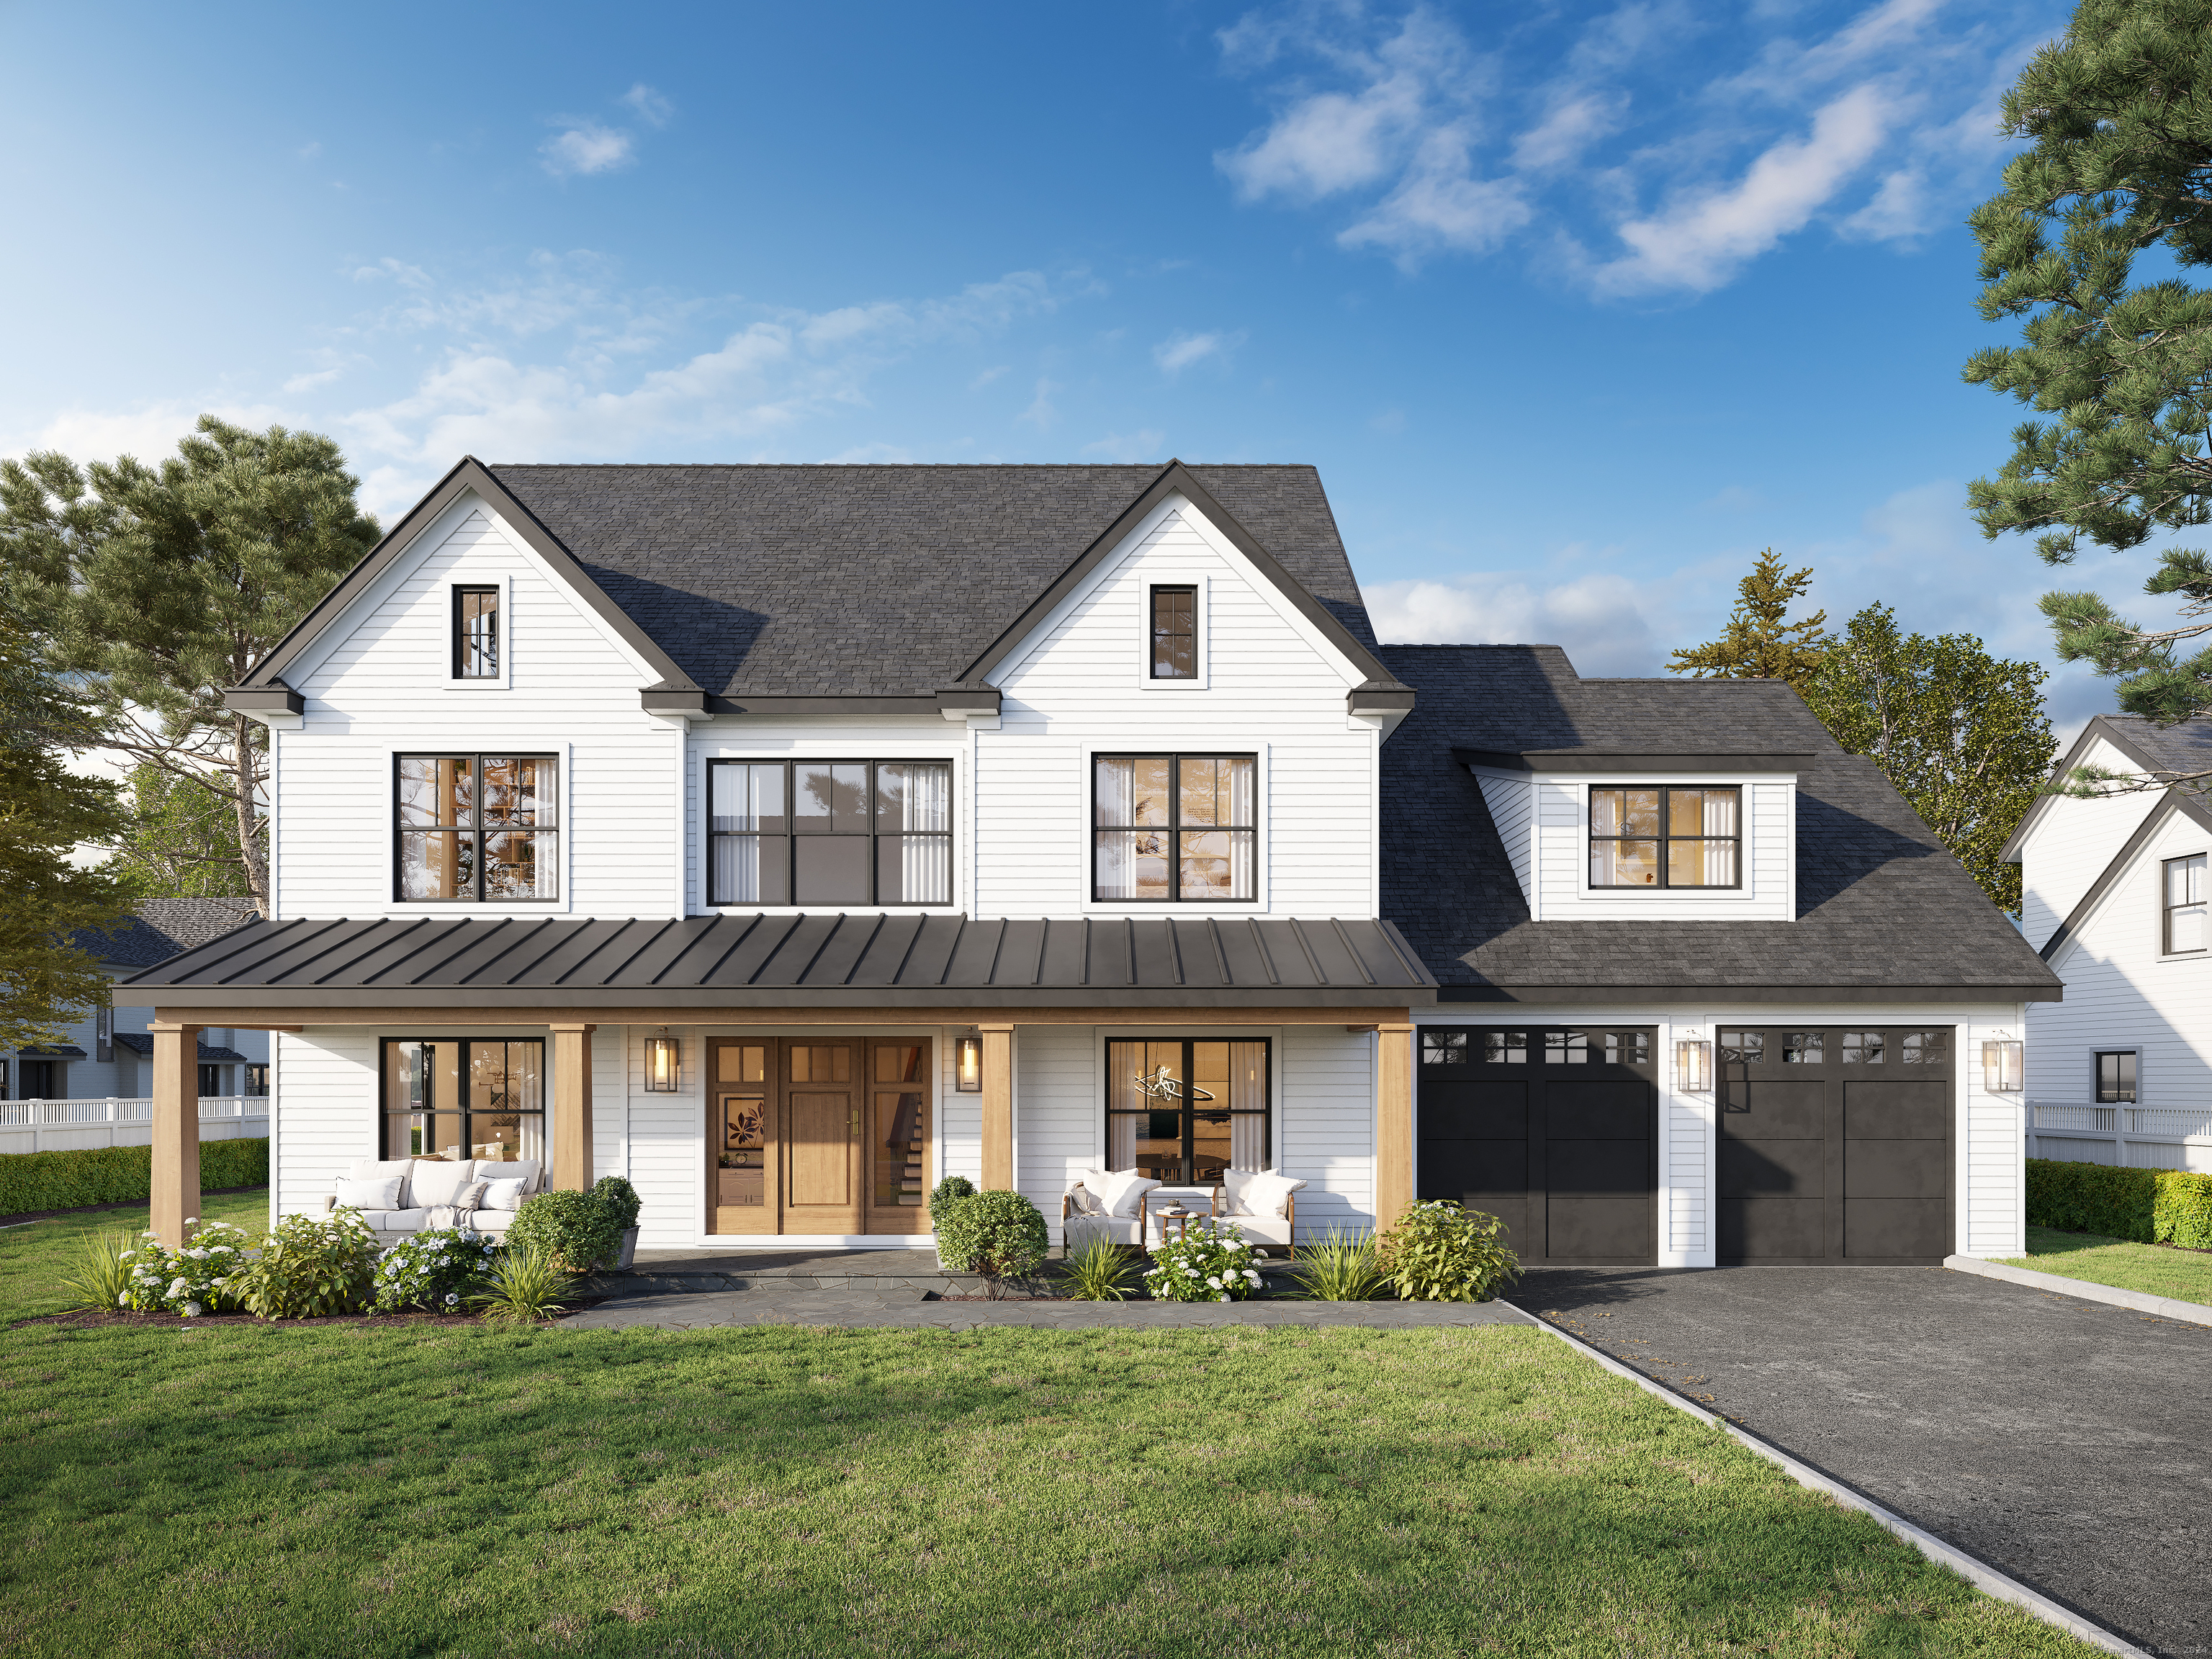 LOT 1 The Reserve at Sterling Ridge, Stamford, CT 06905